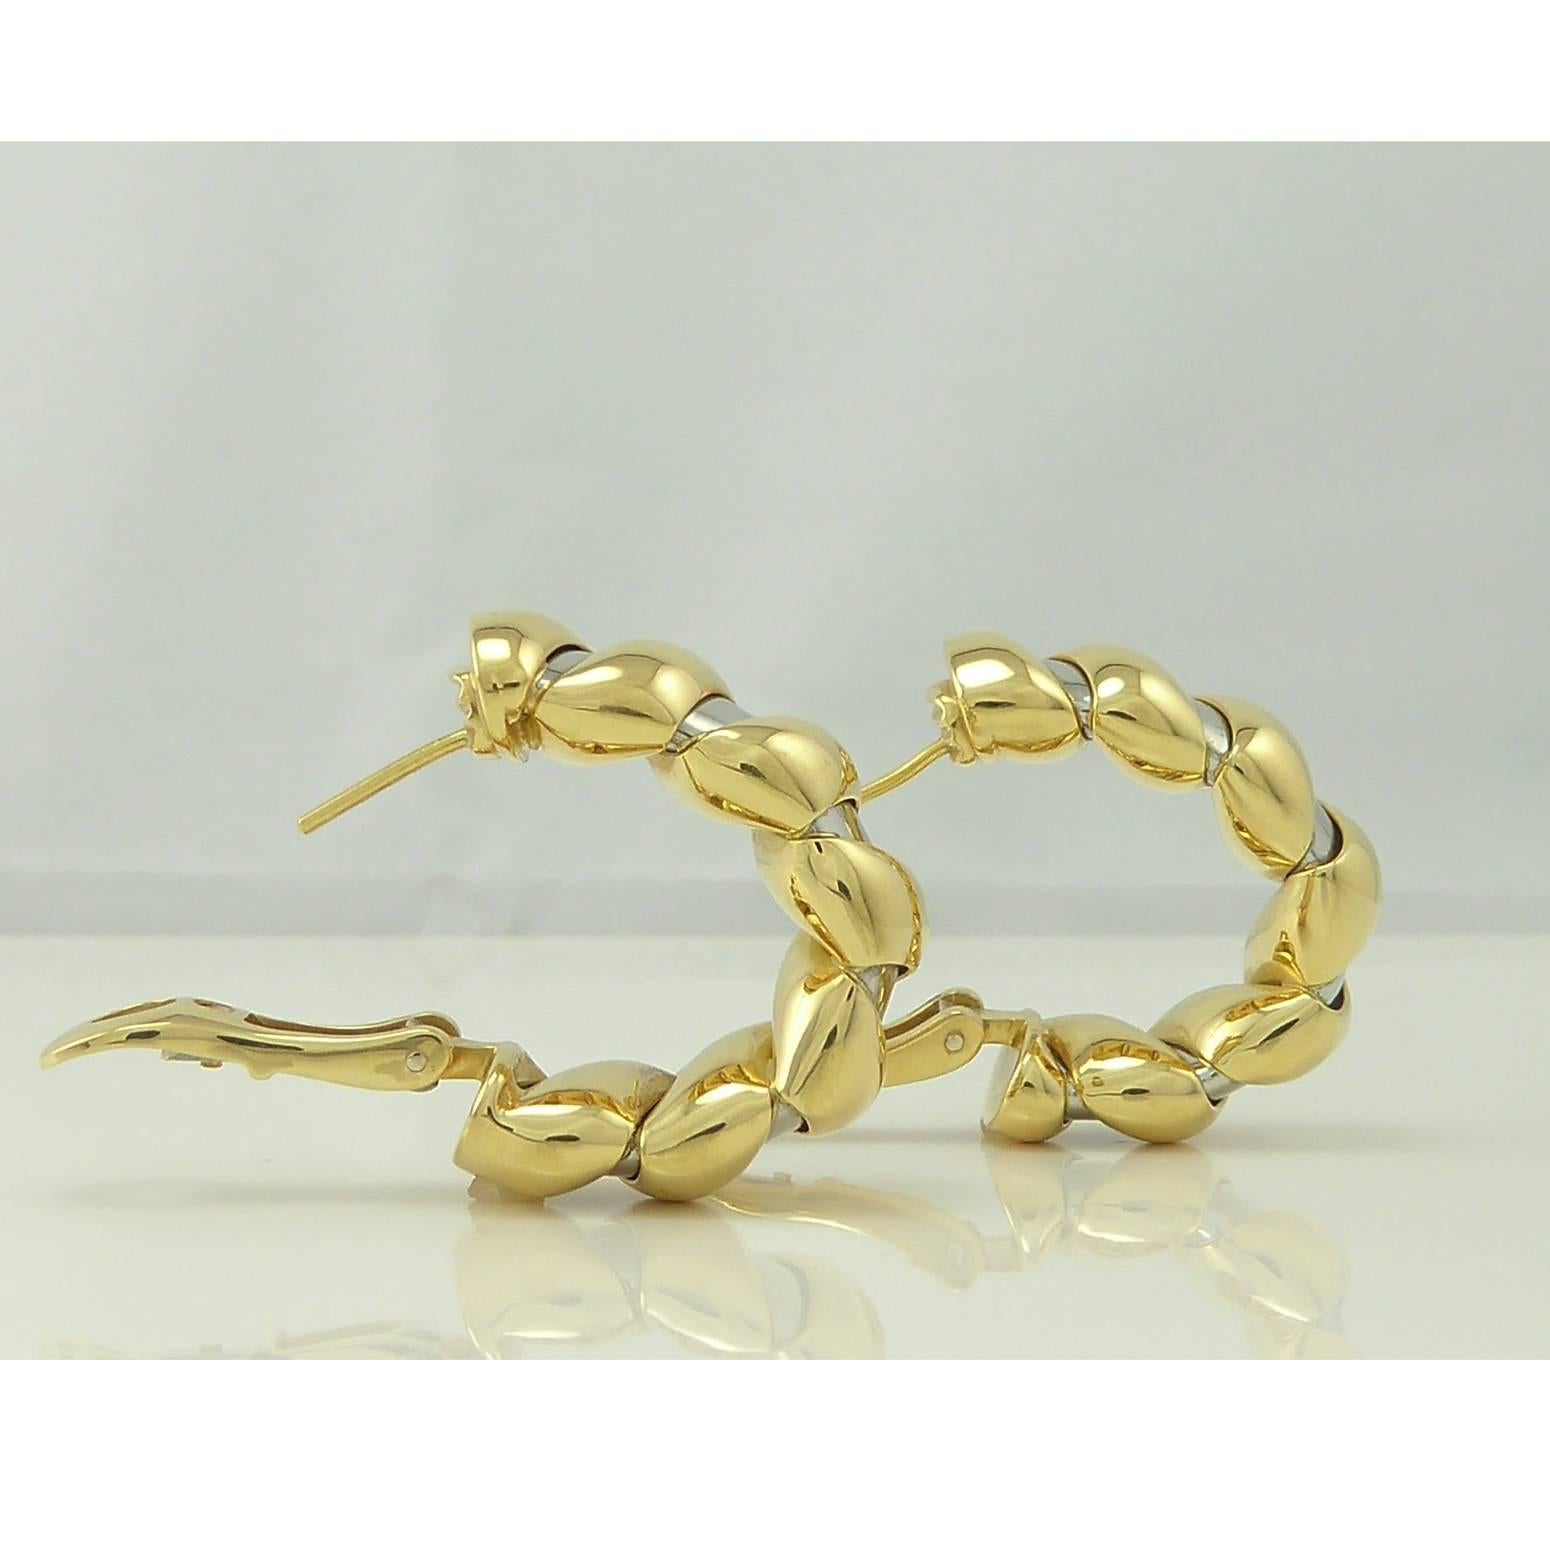 Bulgari Earrings, 18 Carat Gold Steel Banded Hoops, Tubogas Design In Excellent Condition In Yorkshire, West Yorkshire